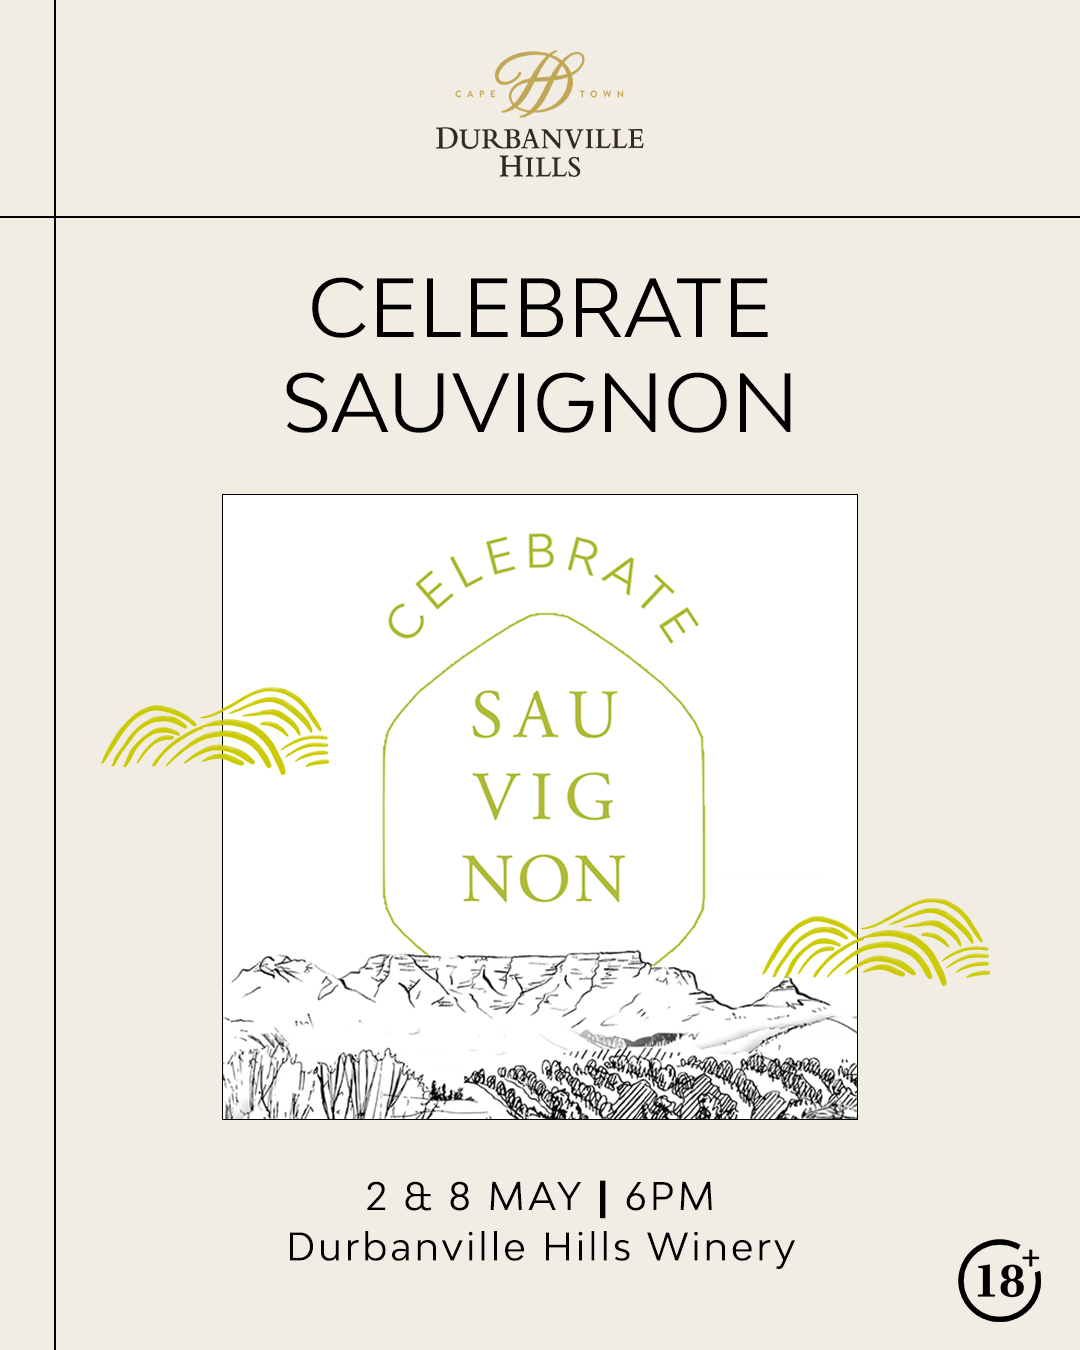 Celebrate Sauvignon - 2nd and 8th May